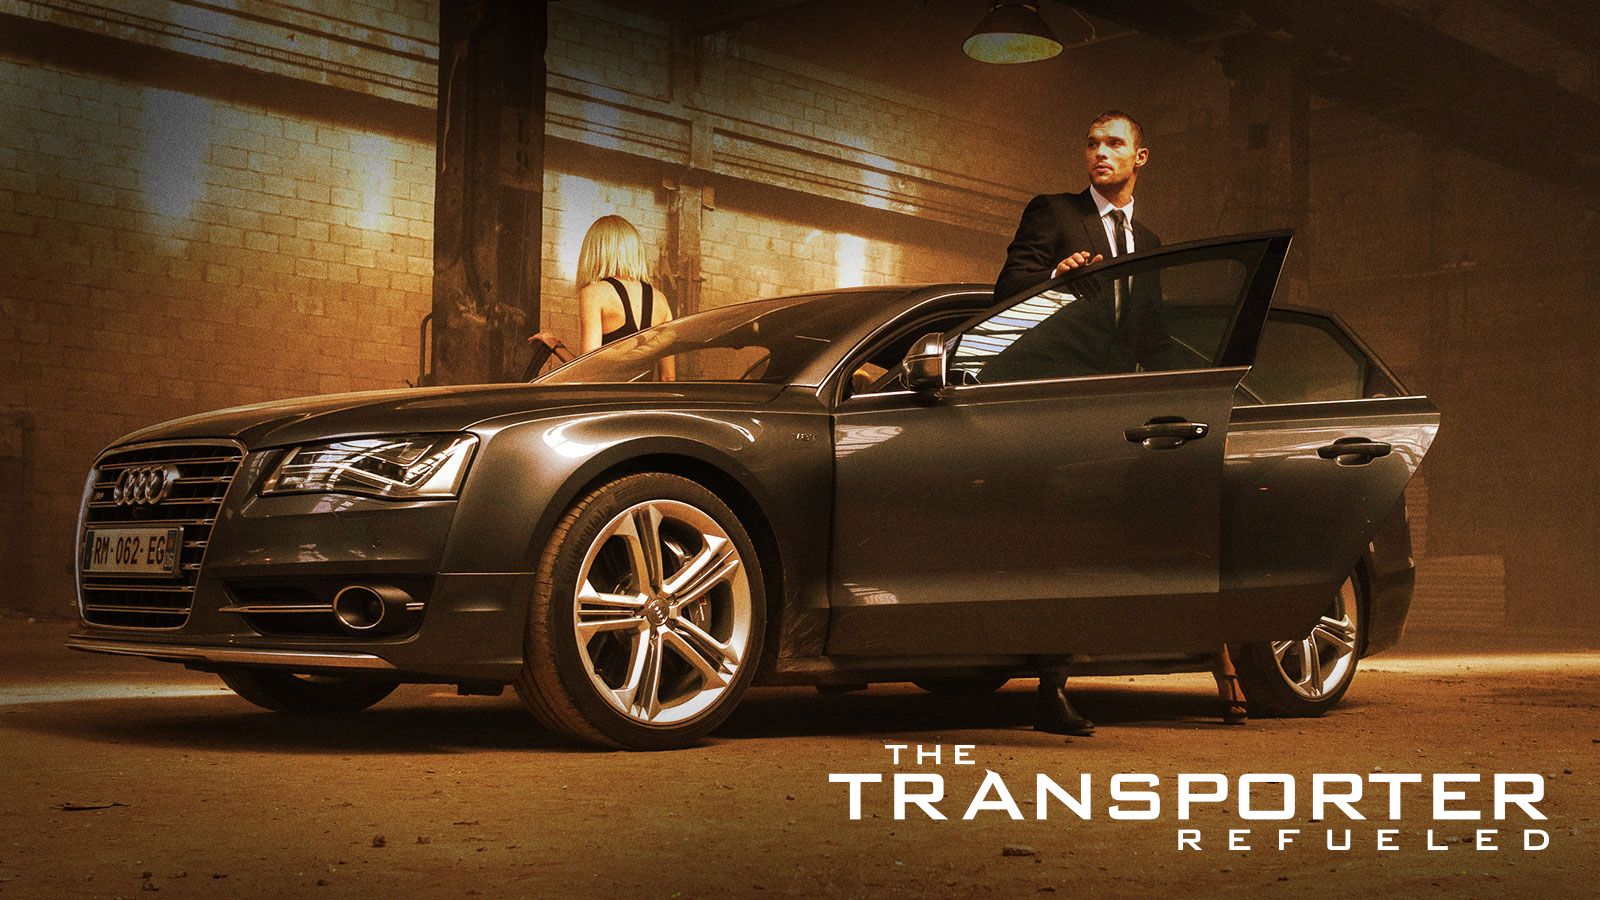 The Transporter Refueled HD Wallpaper Movies Trailer Film